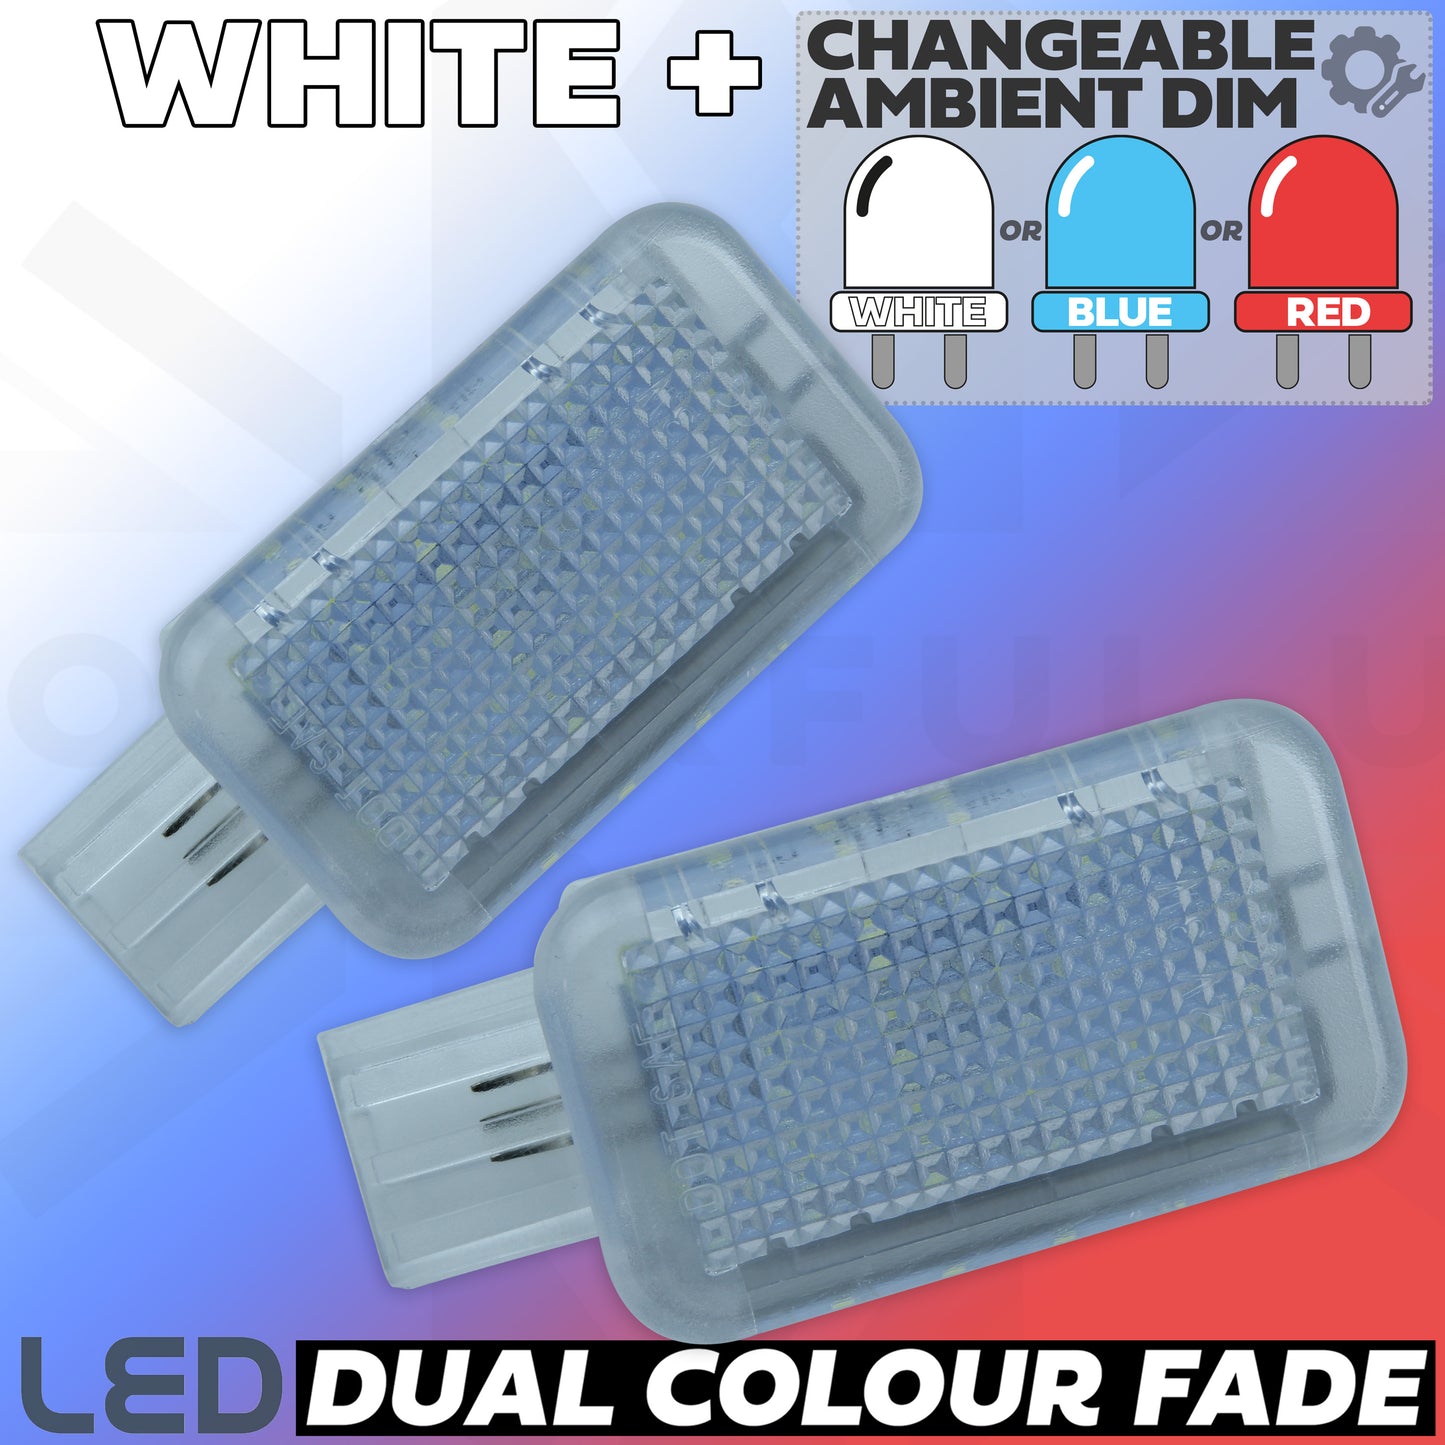 WHITE-RED-BLUE LED interior Footwell ambient lamp upgrade for Land Rover Discovery 5 (2pc)